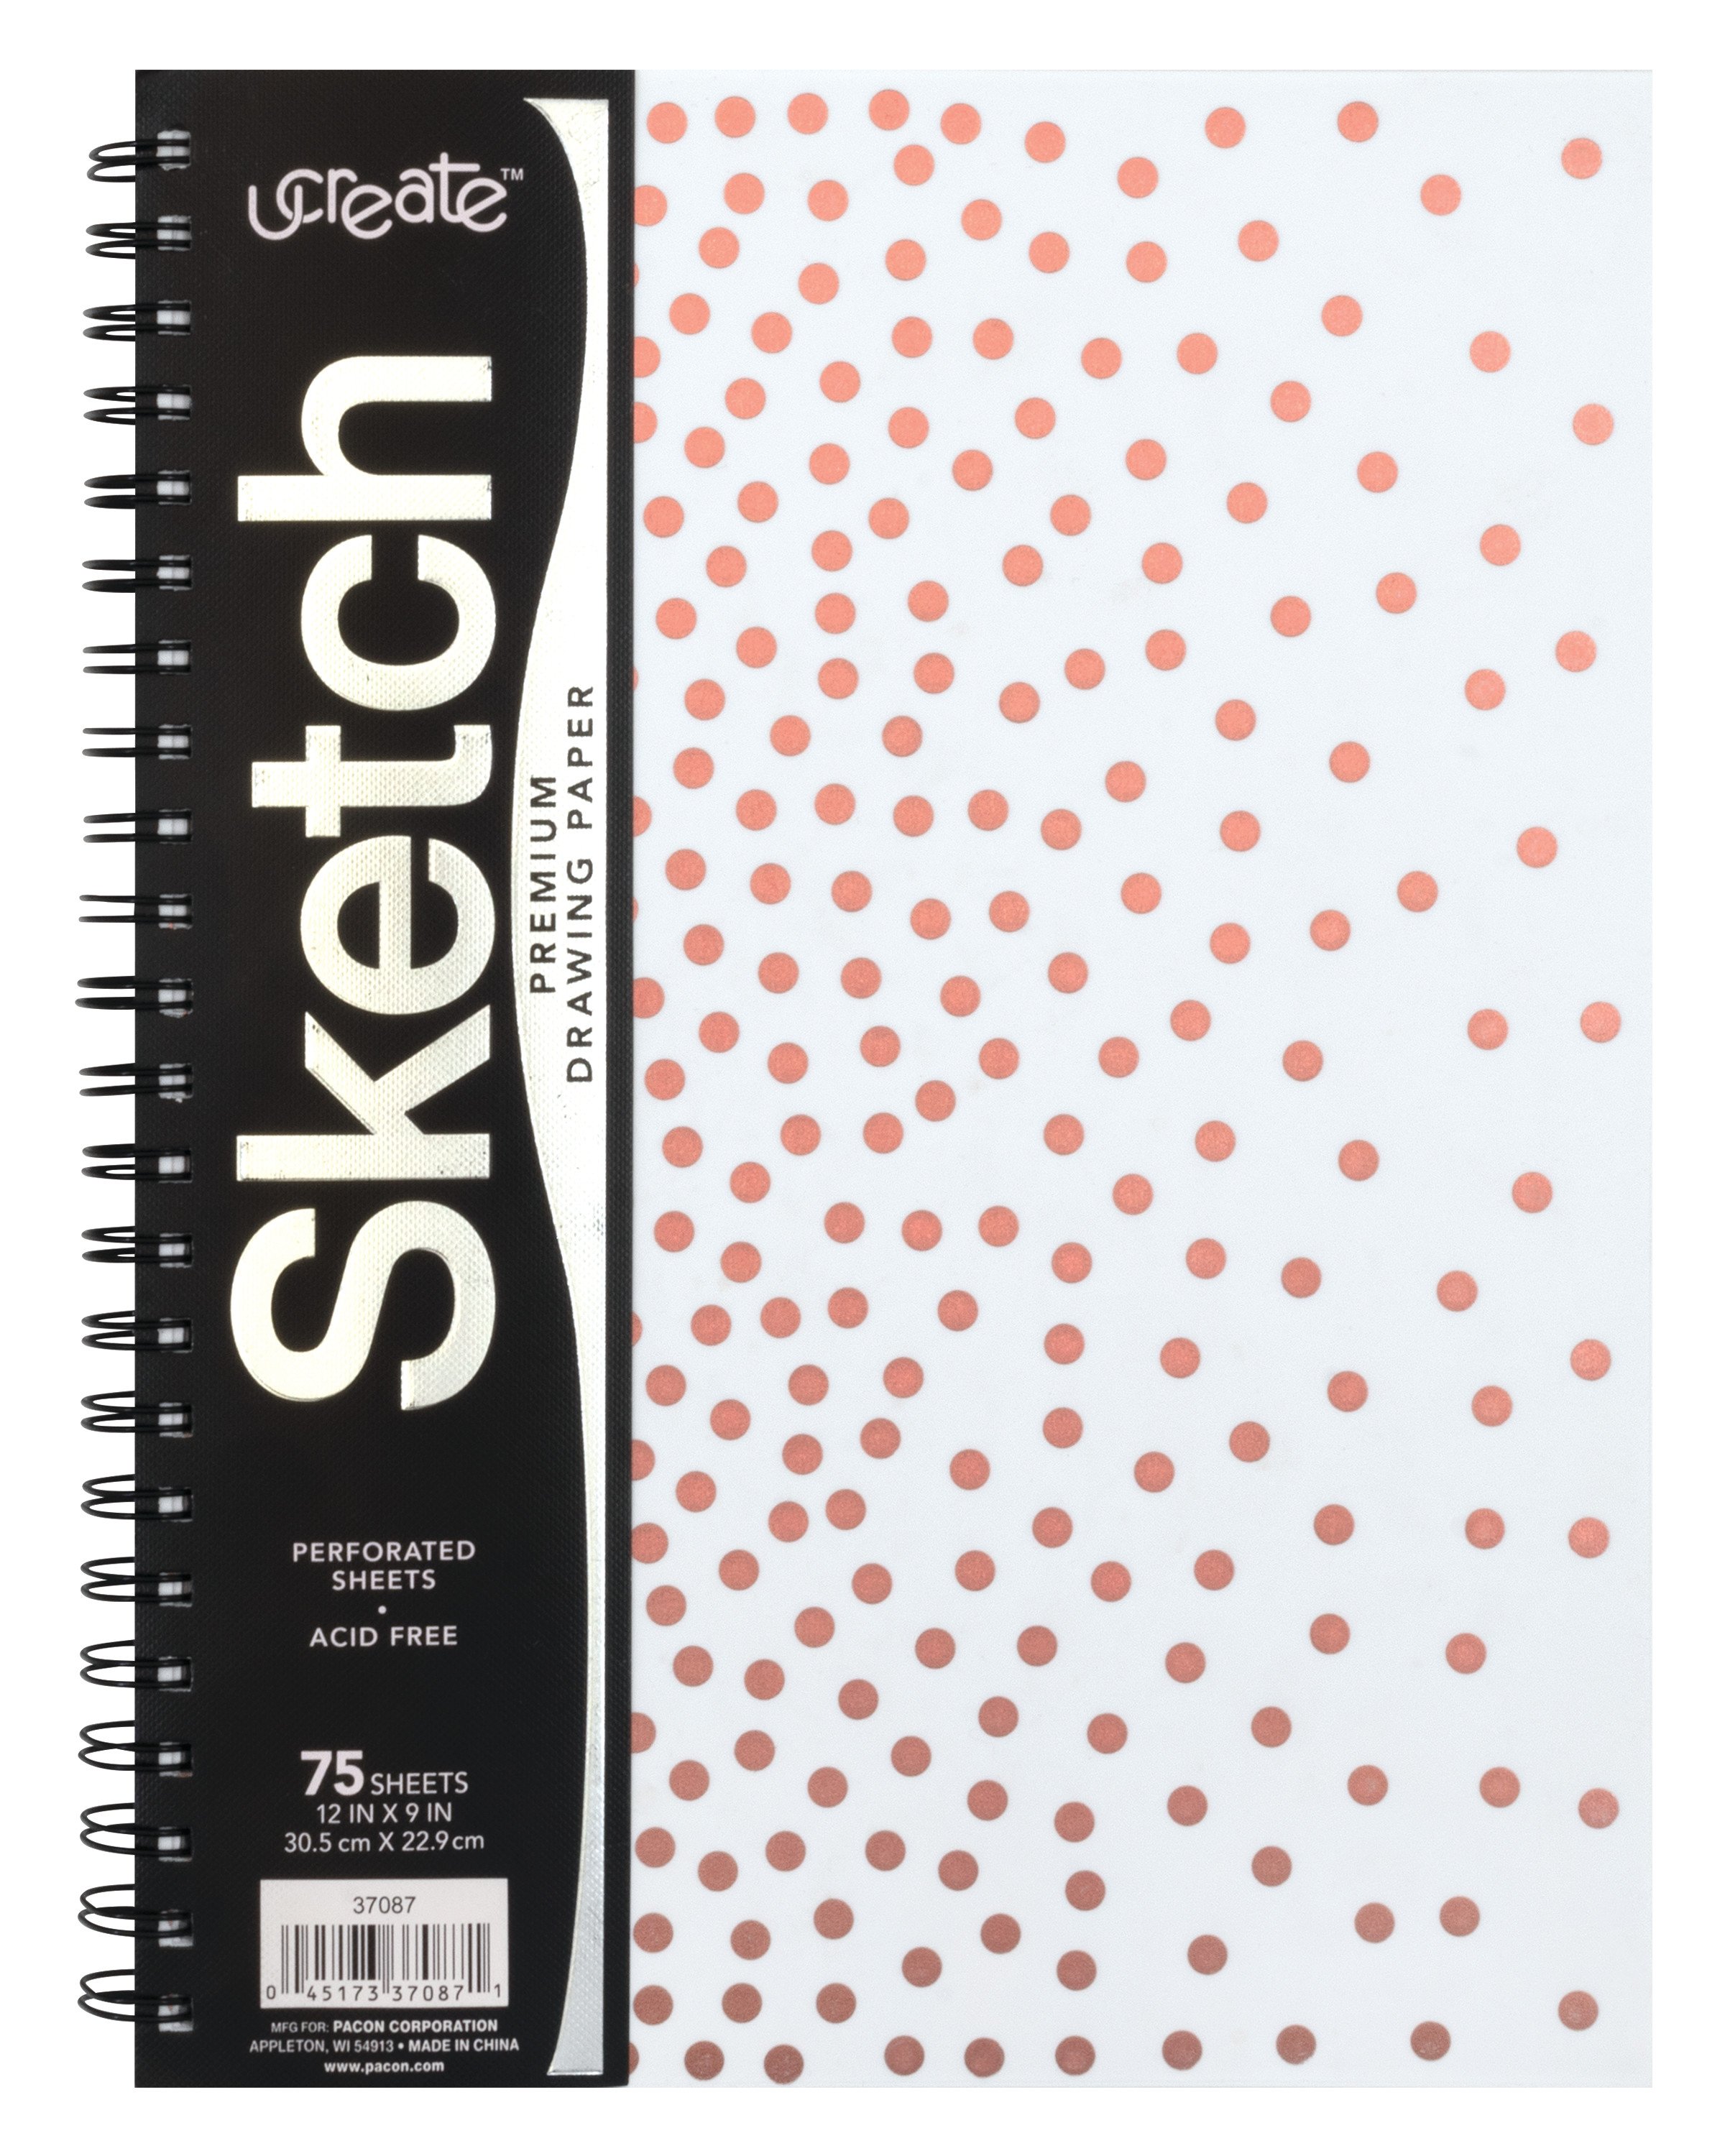 12" x 9" 75 Sheets Brand New UCreate Sketch Premium Drawing Paper 